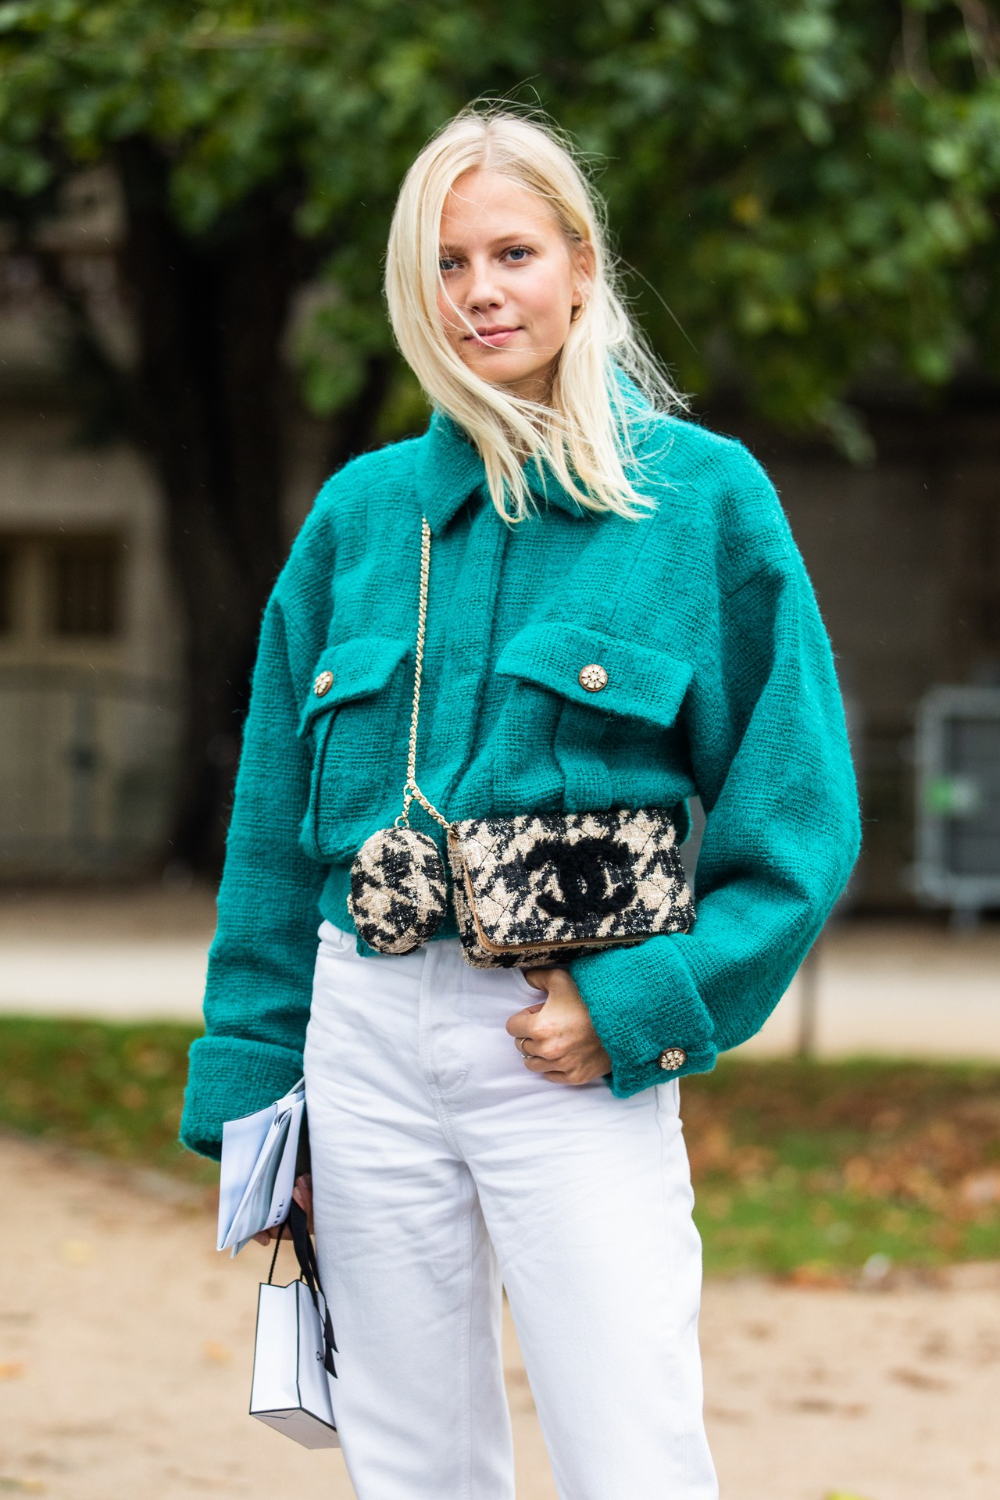 Street style: 40 on-trend Chanel looks spotted at Fashion Week - Street style: 40 on-trend Chanel looks spotted at Fashion Week -   16 style Feminino show ideas